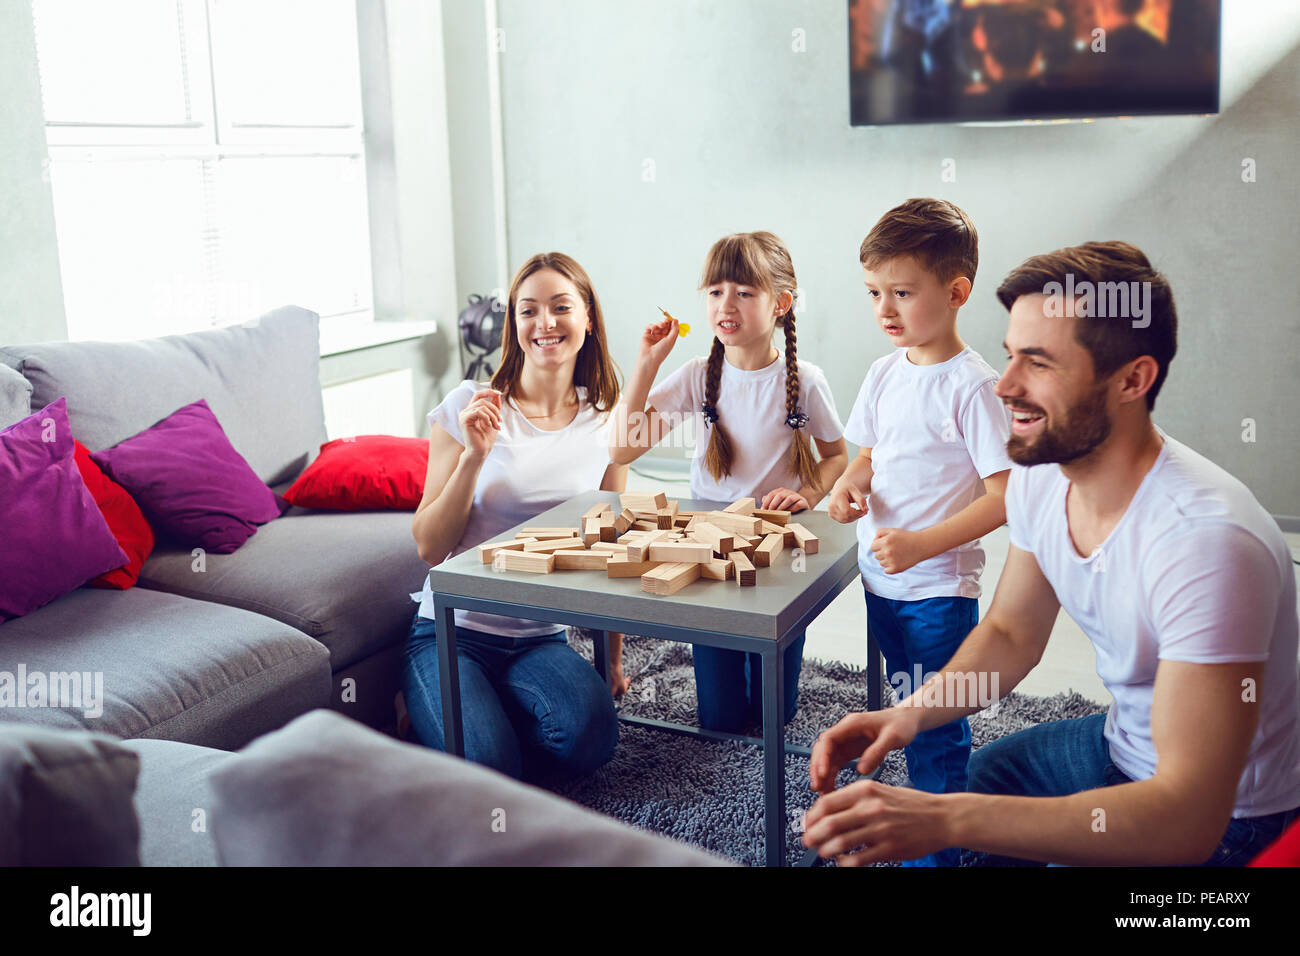 Mother, father and children play together. Stock Photo